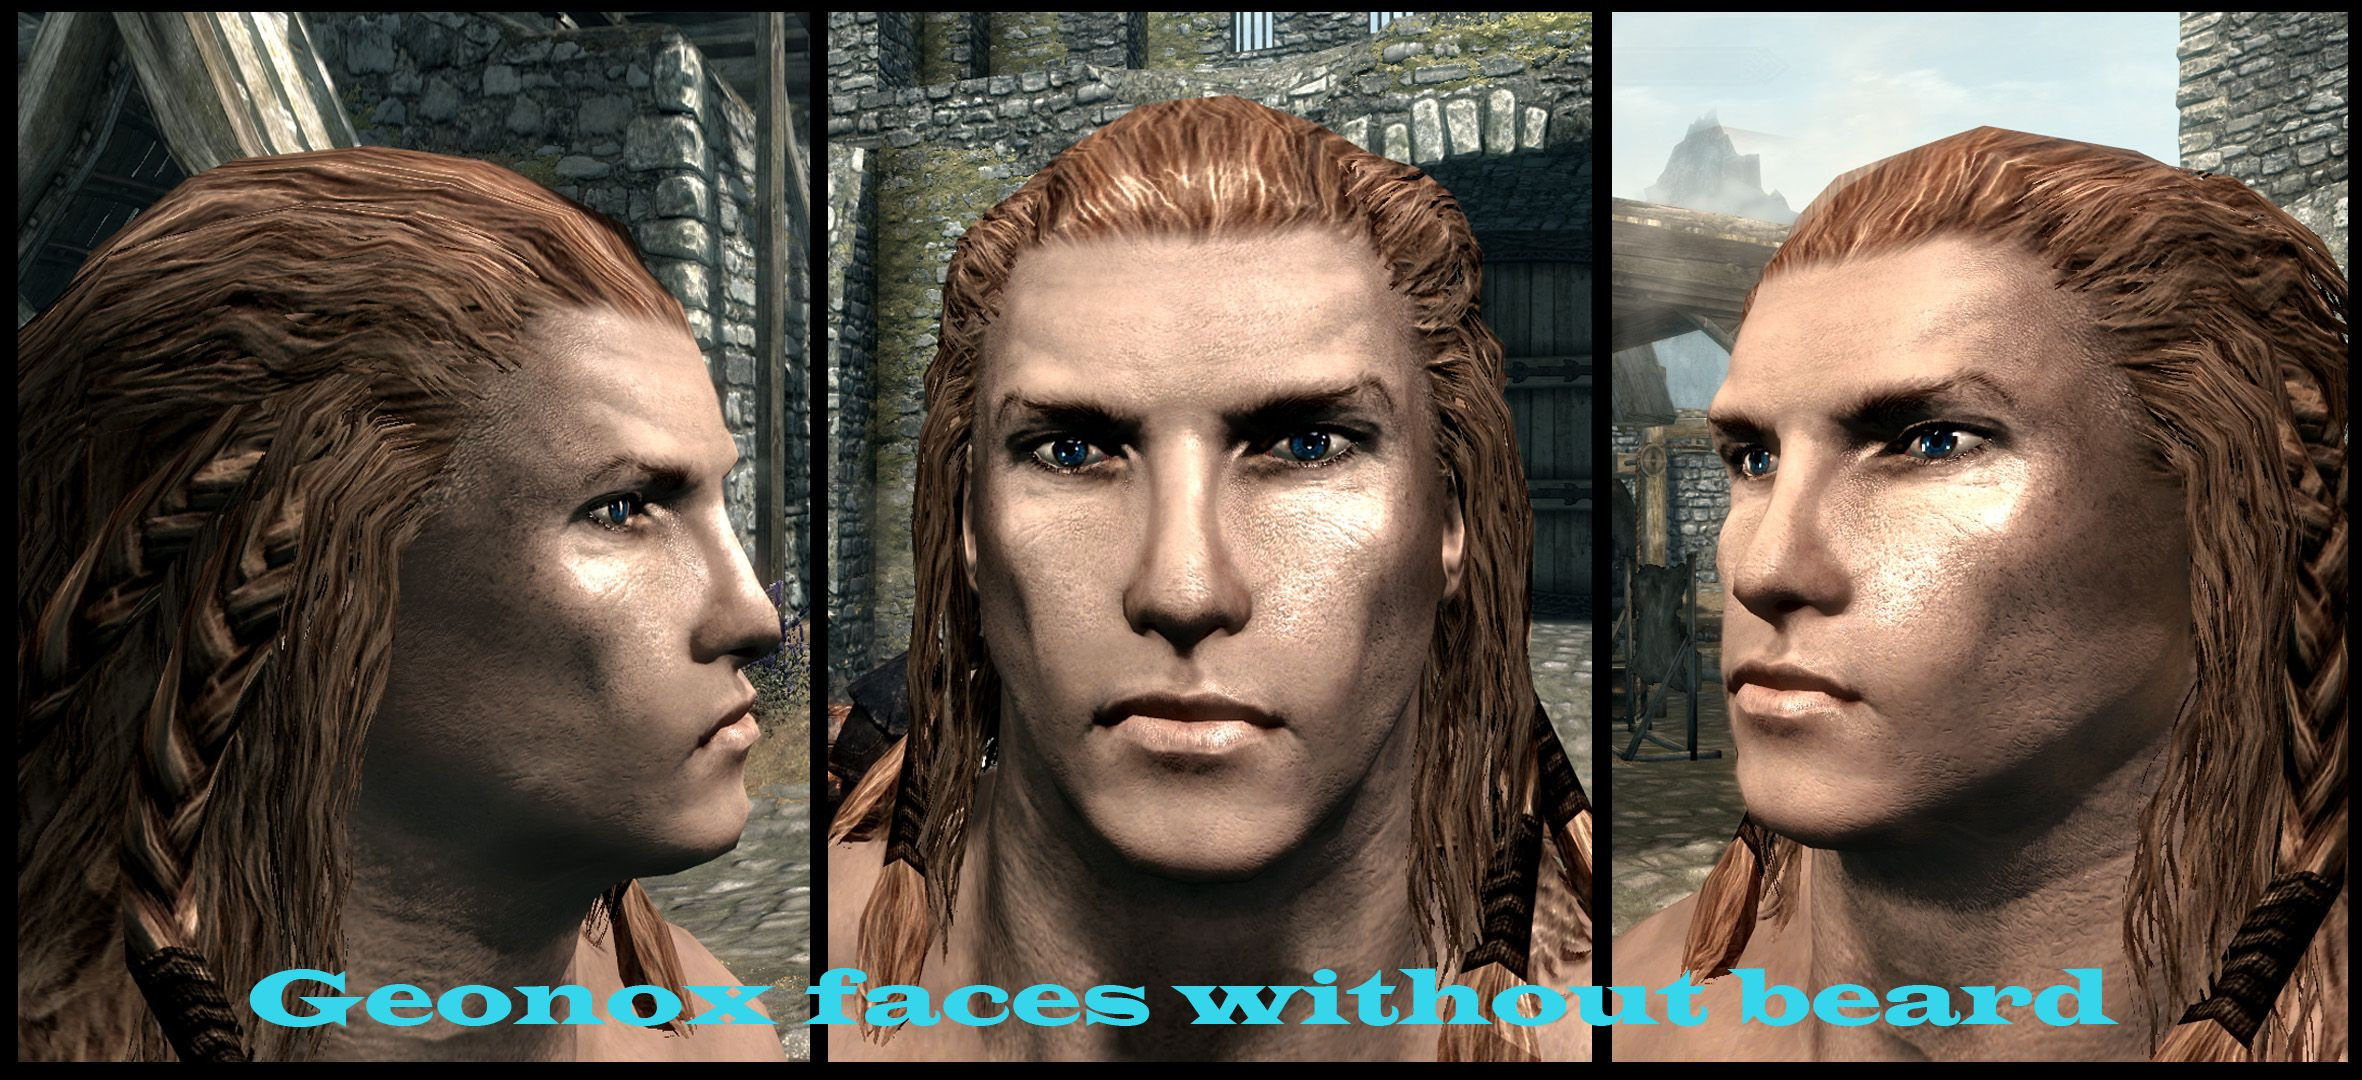 Skyrim Hairstyles Male
 Better males Beautiful s and faces New hairstyles